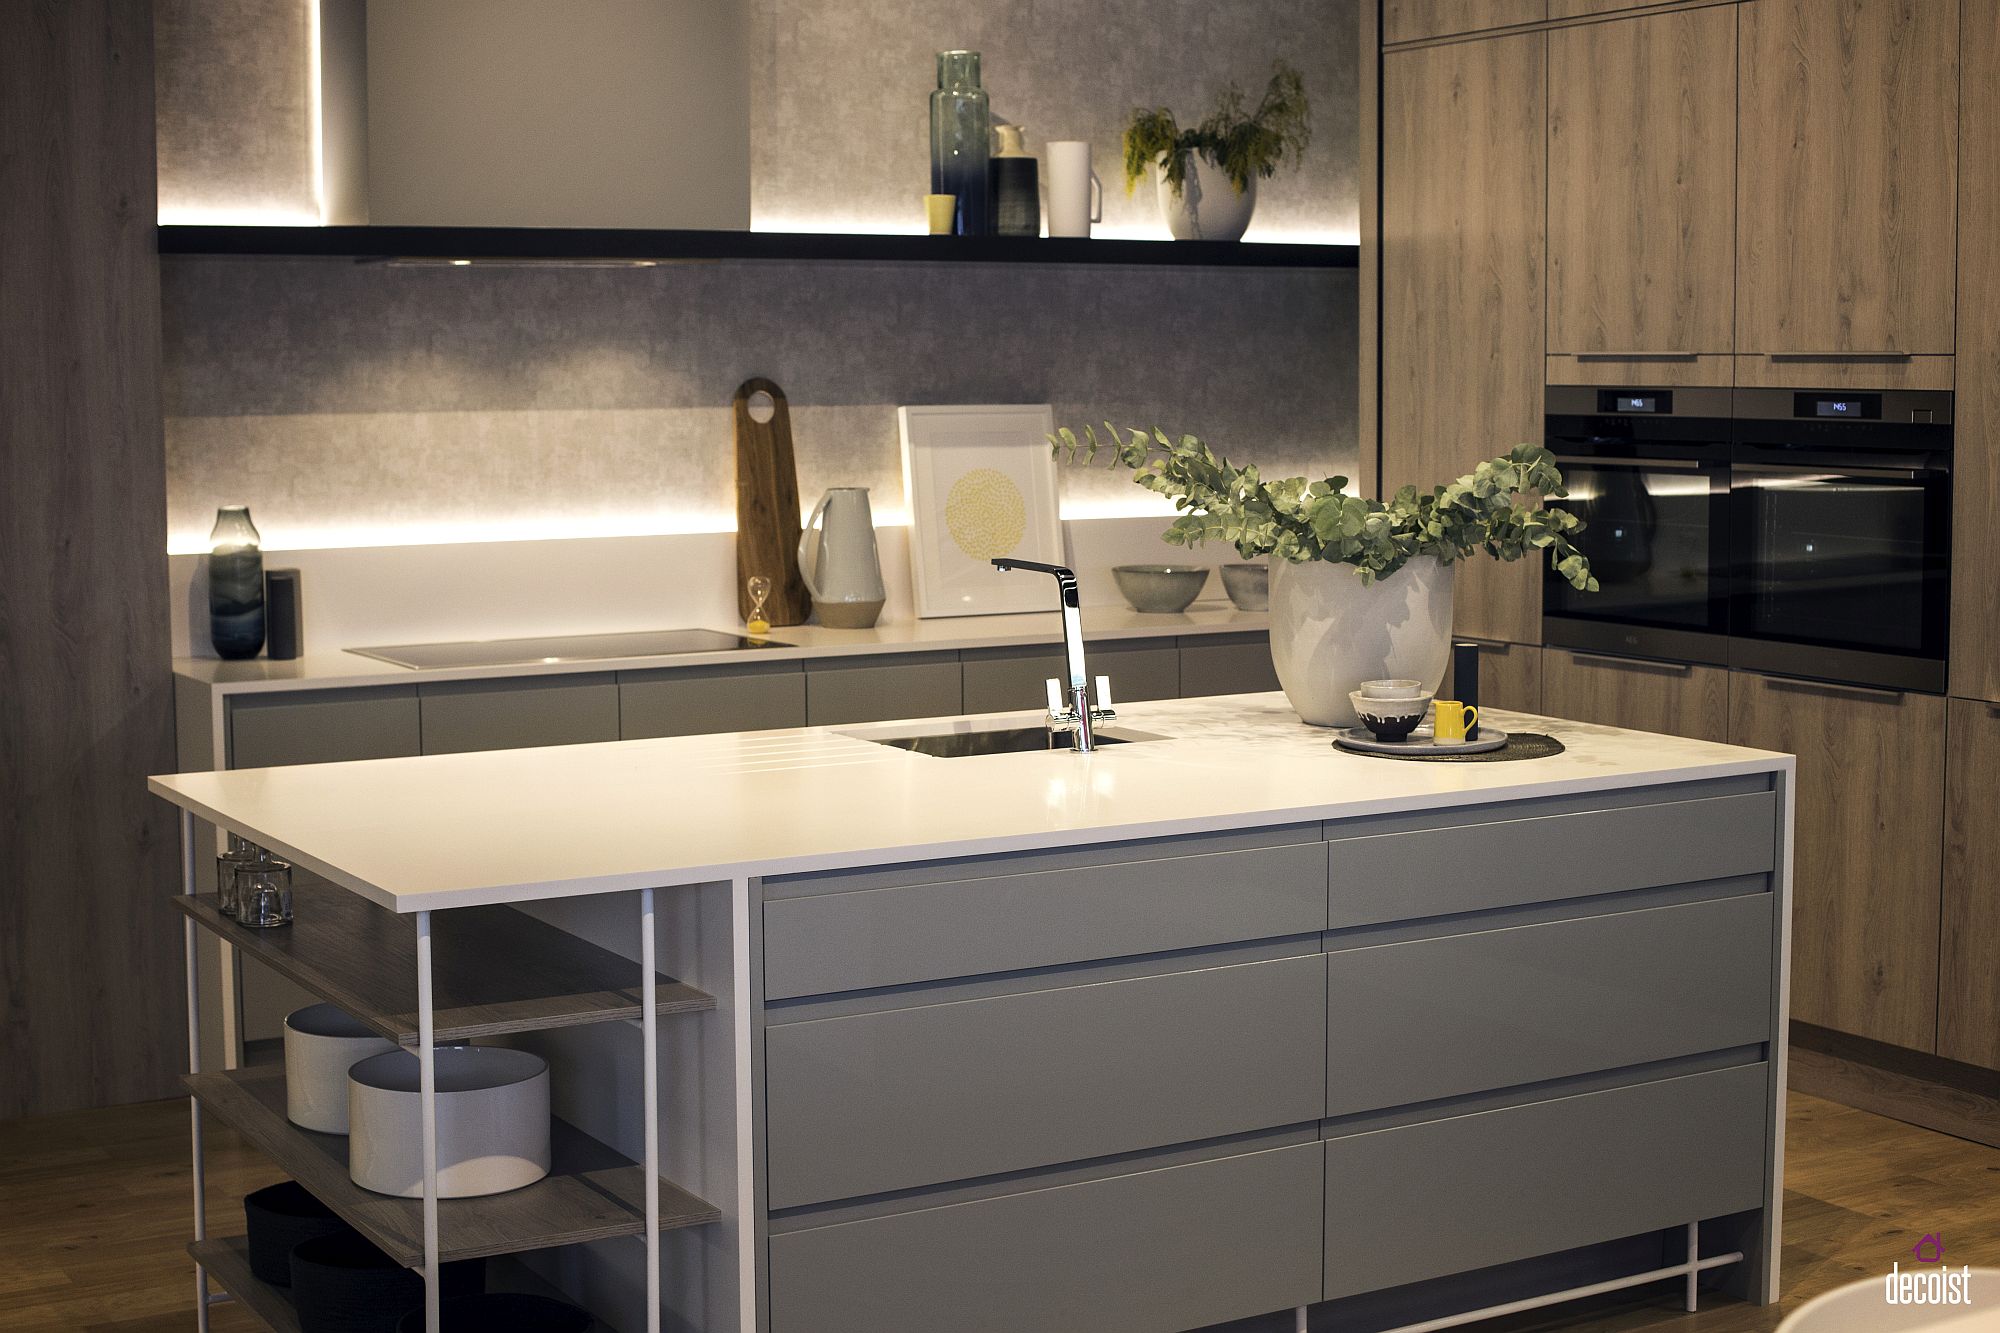 Even-the-tiniest-of-kitchens-and-darkest-of-corners-can-be-enlivened-with-LED-strip-lights